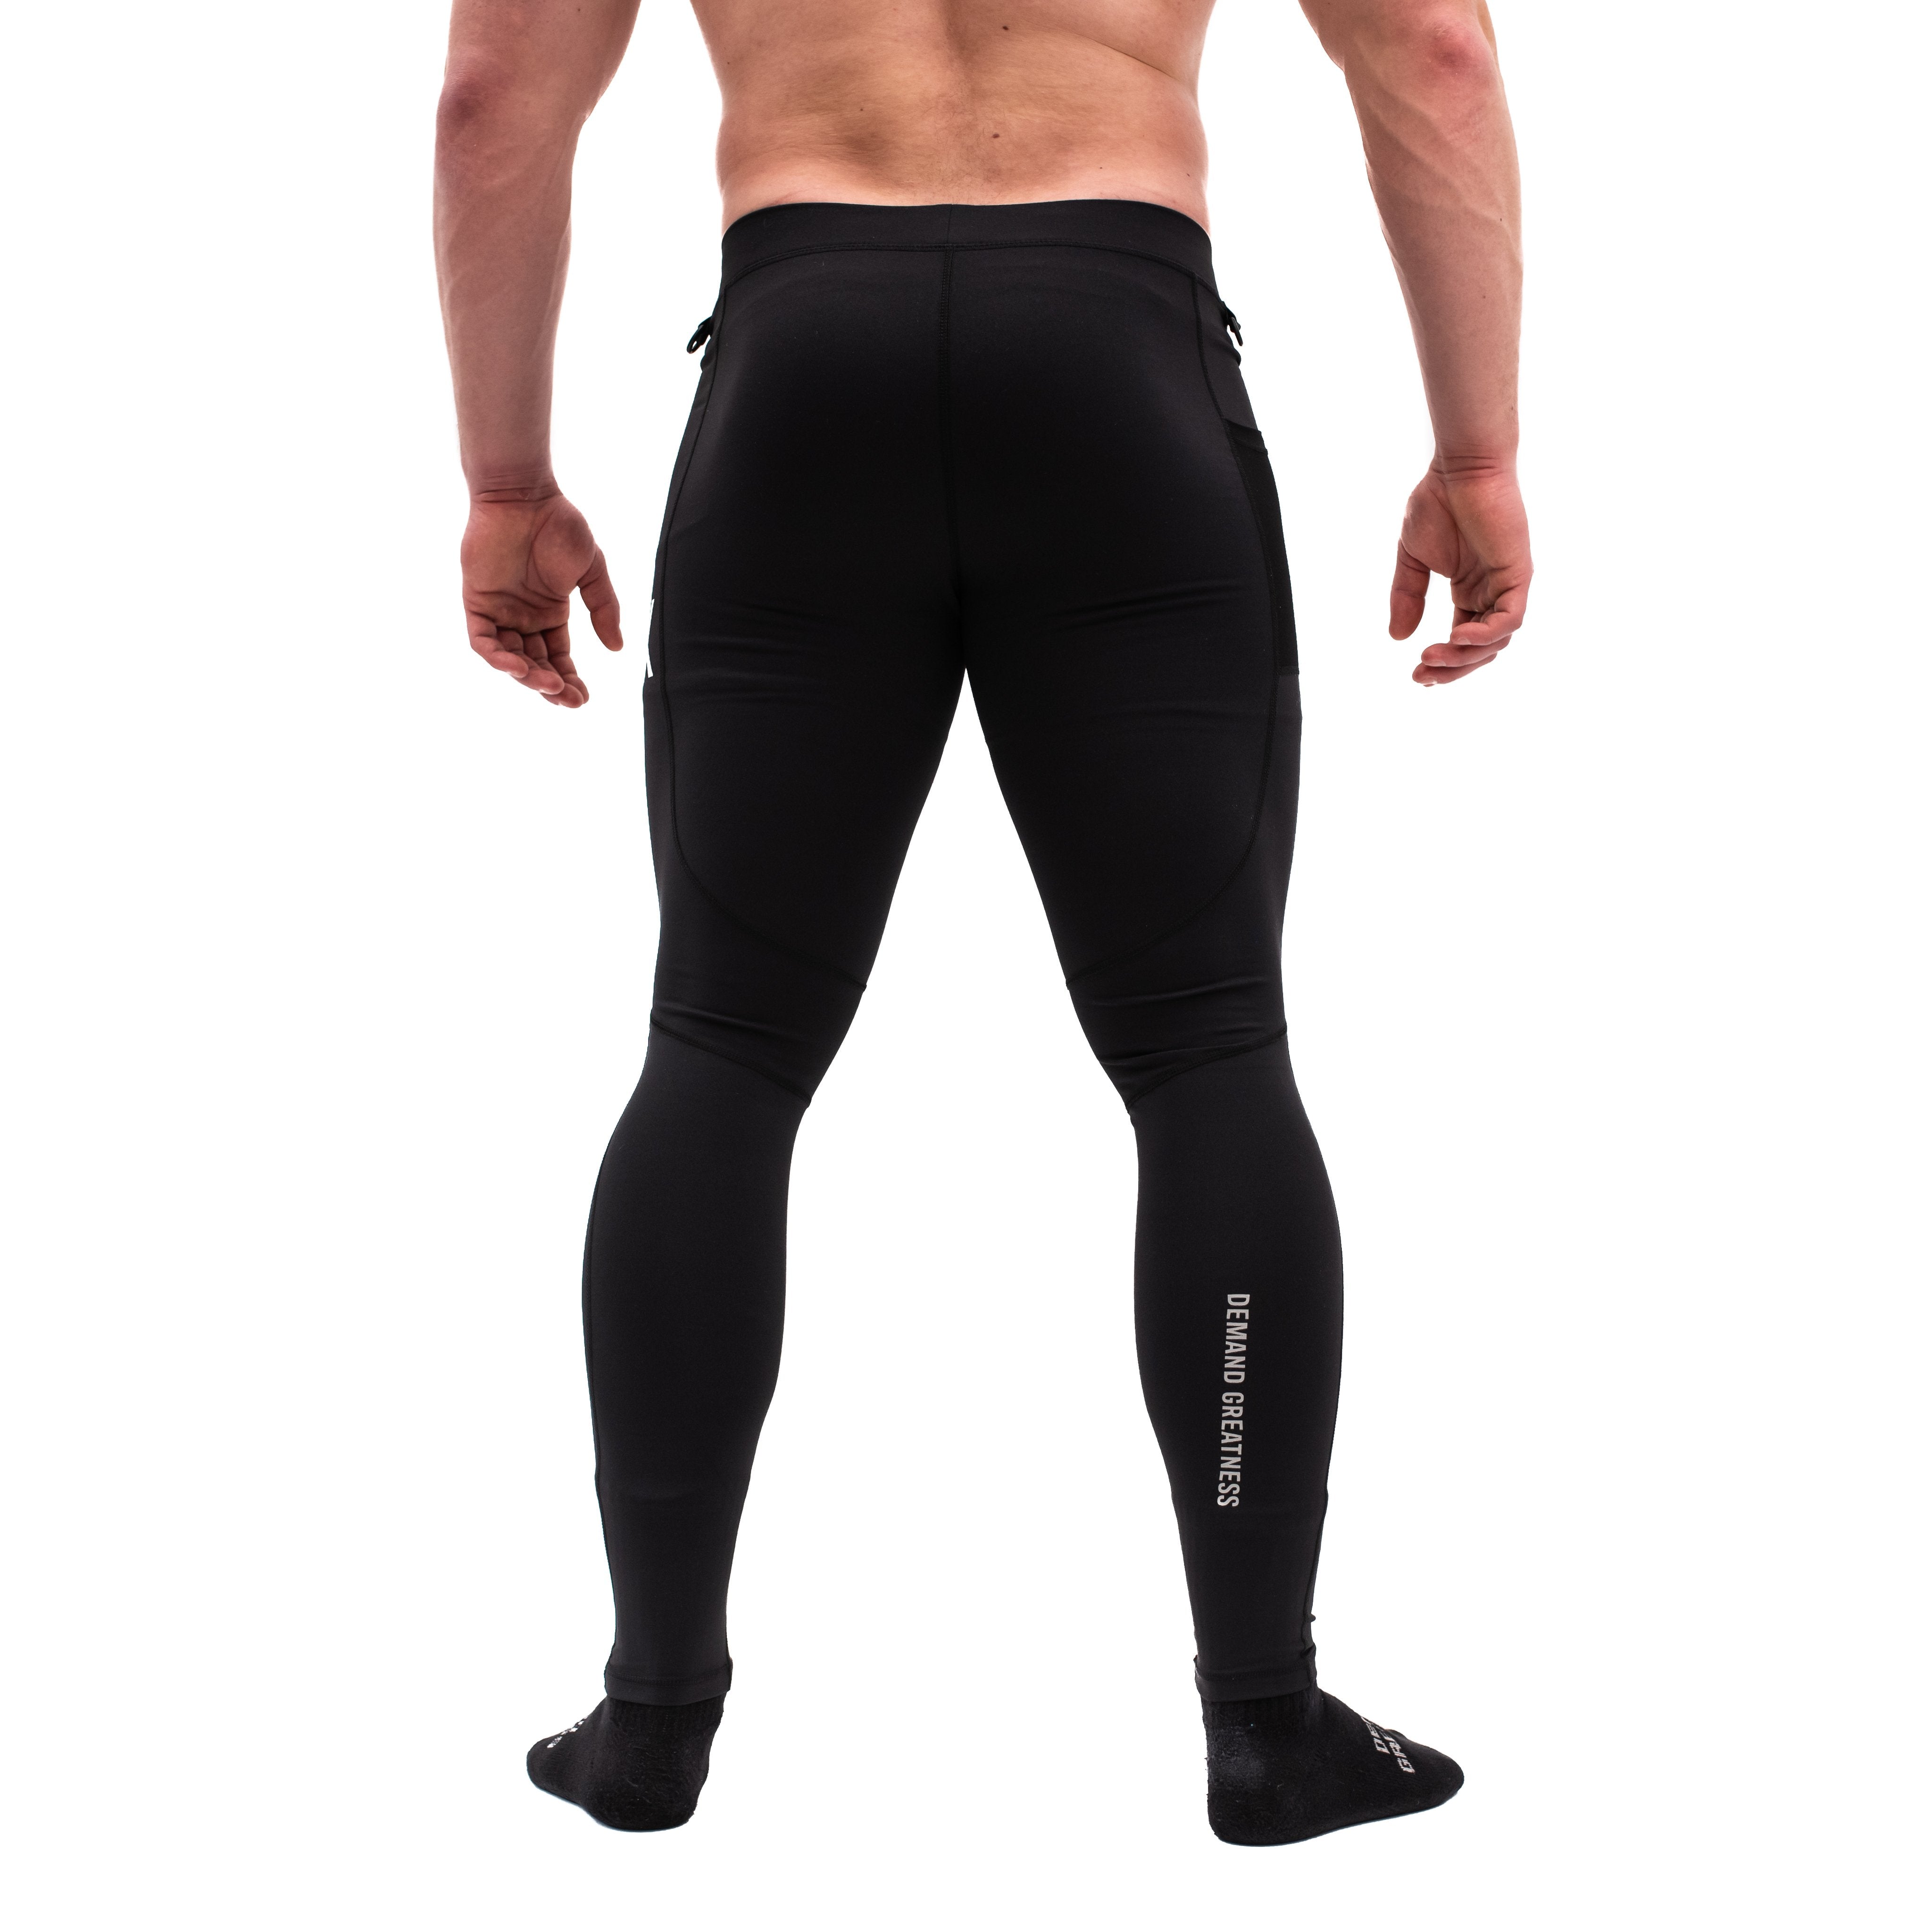 Liveday Men Compression Tights Pants Gym Sport Joggers India | Ubuy